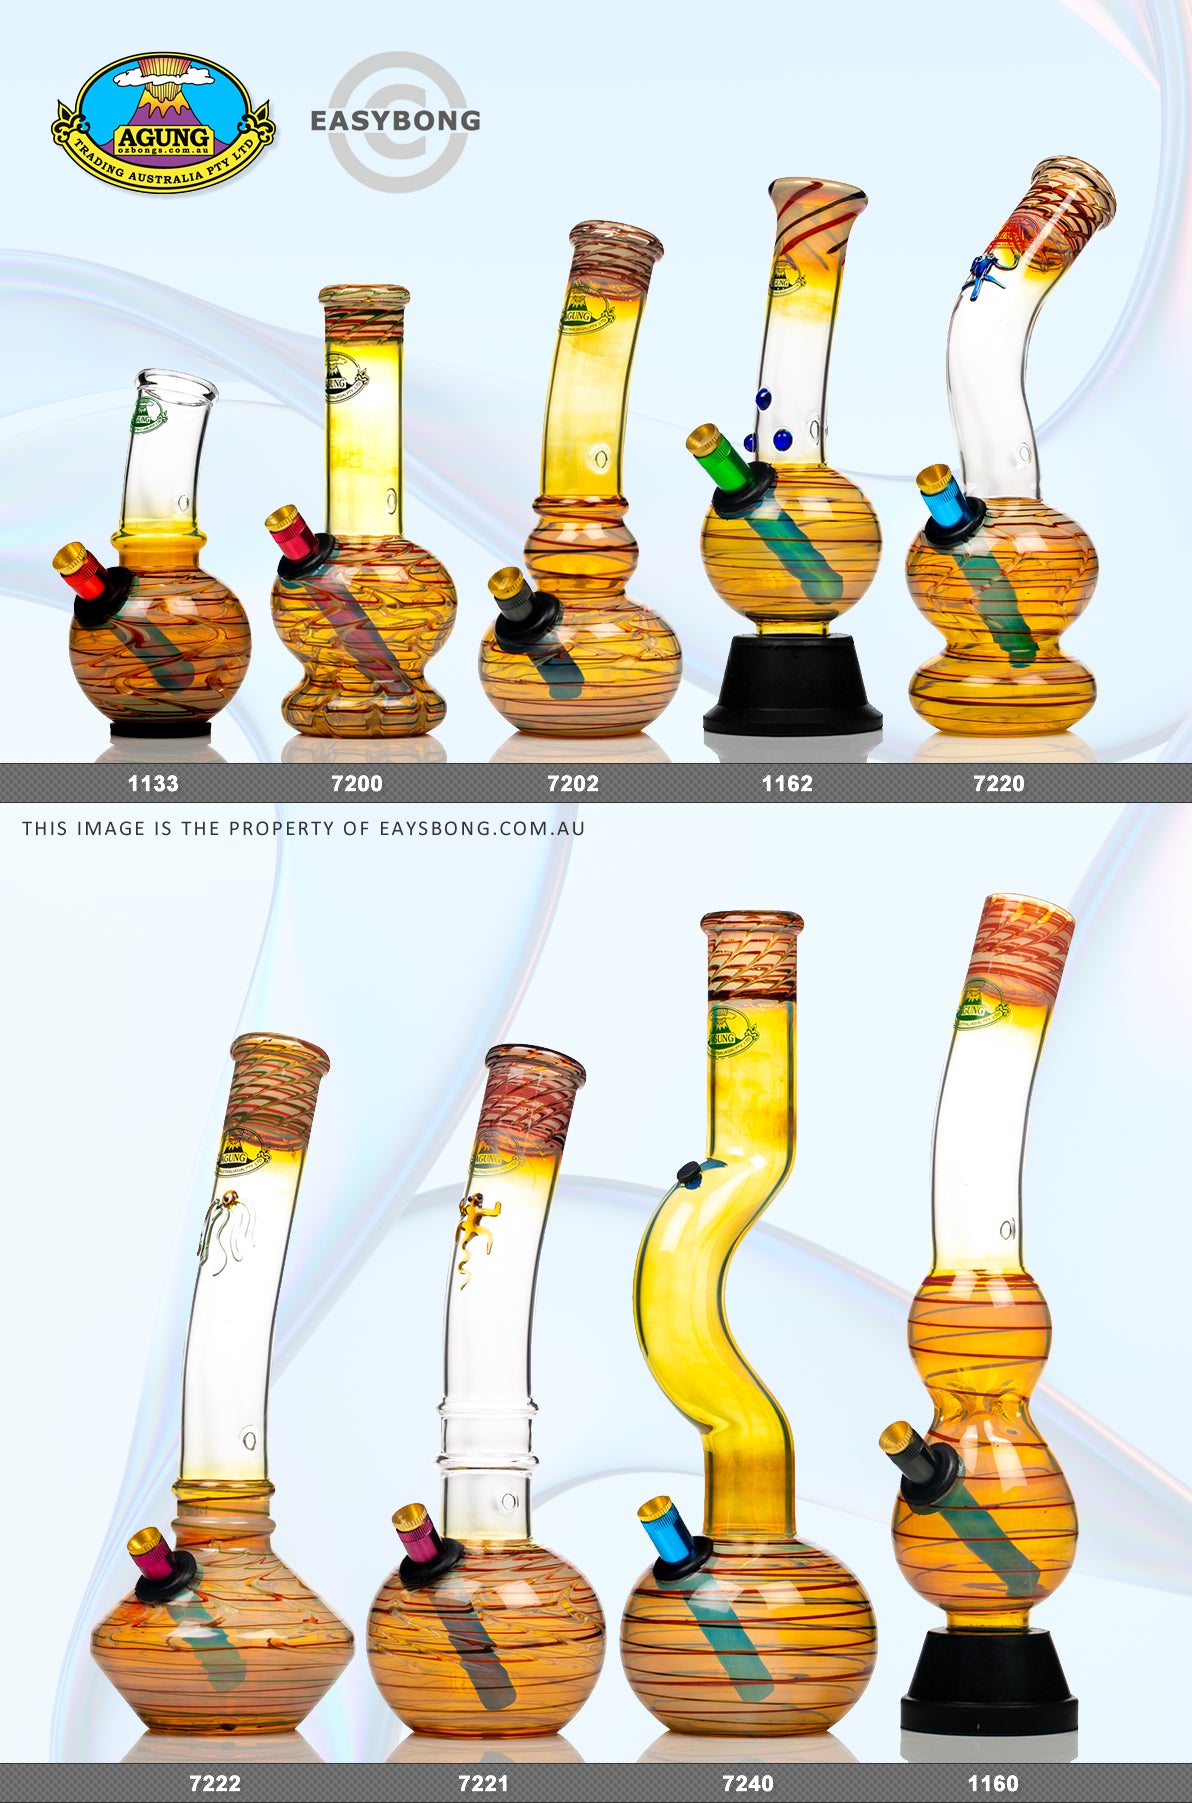 Size difference of Agung Australian glass bongs.